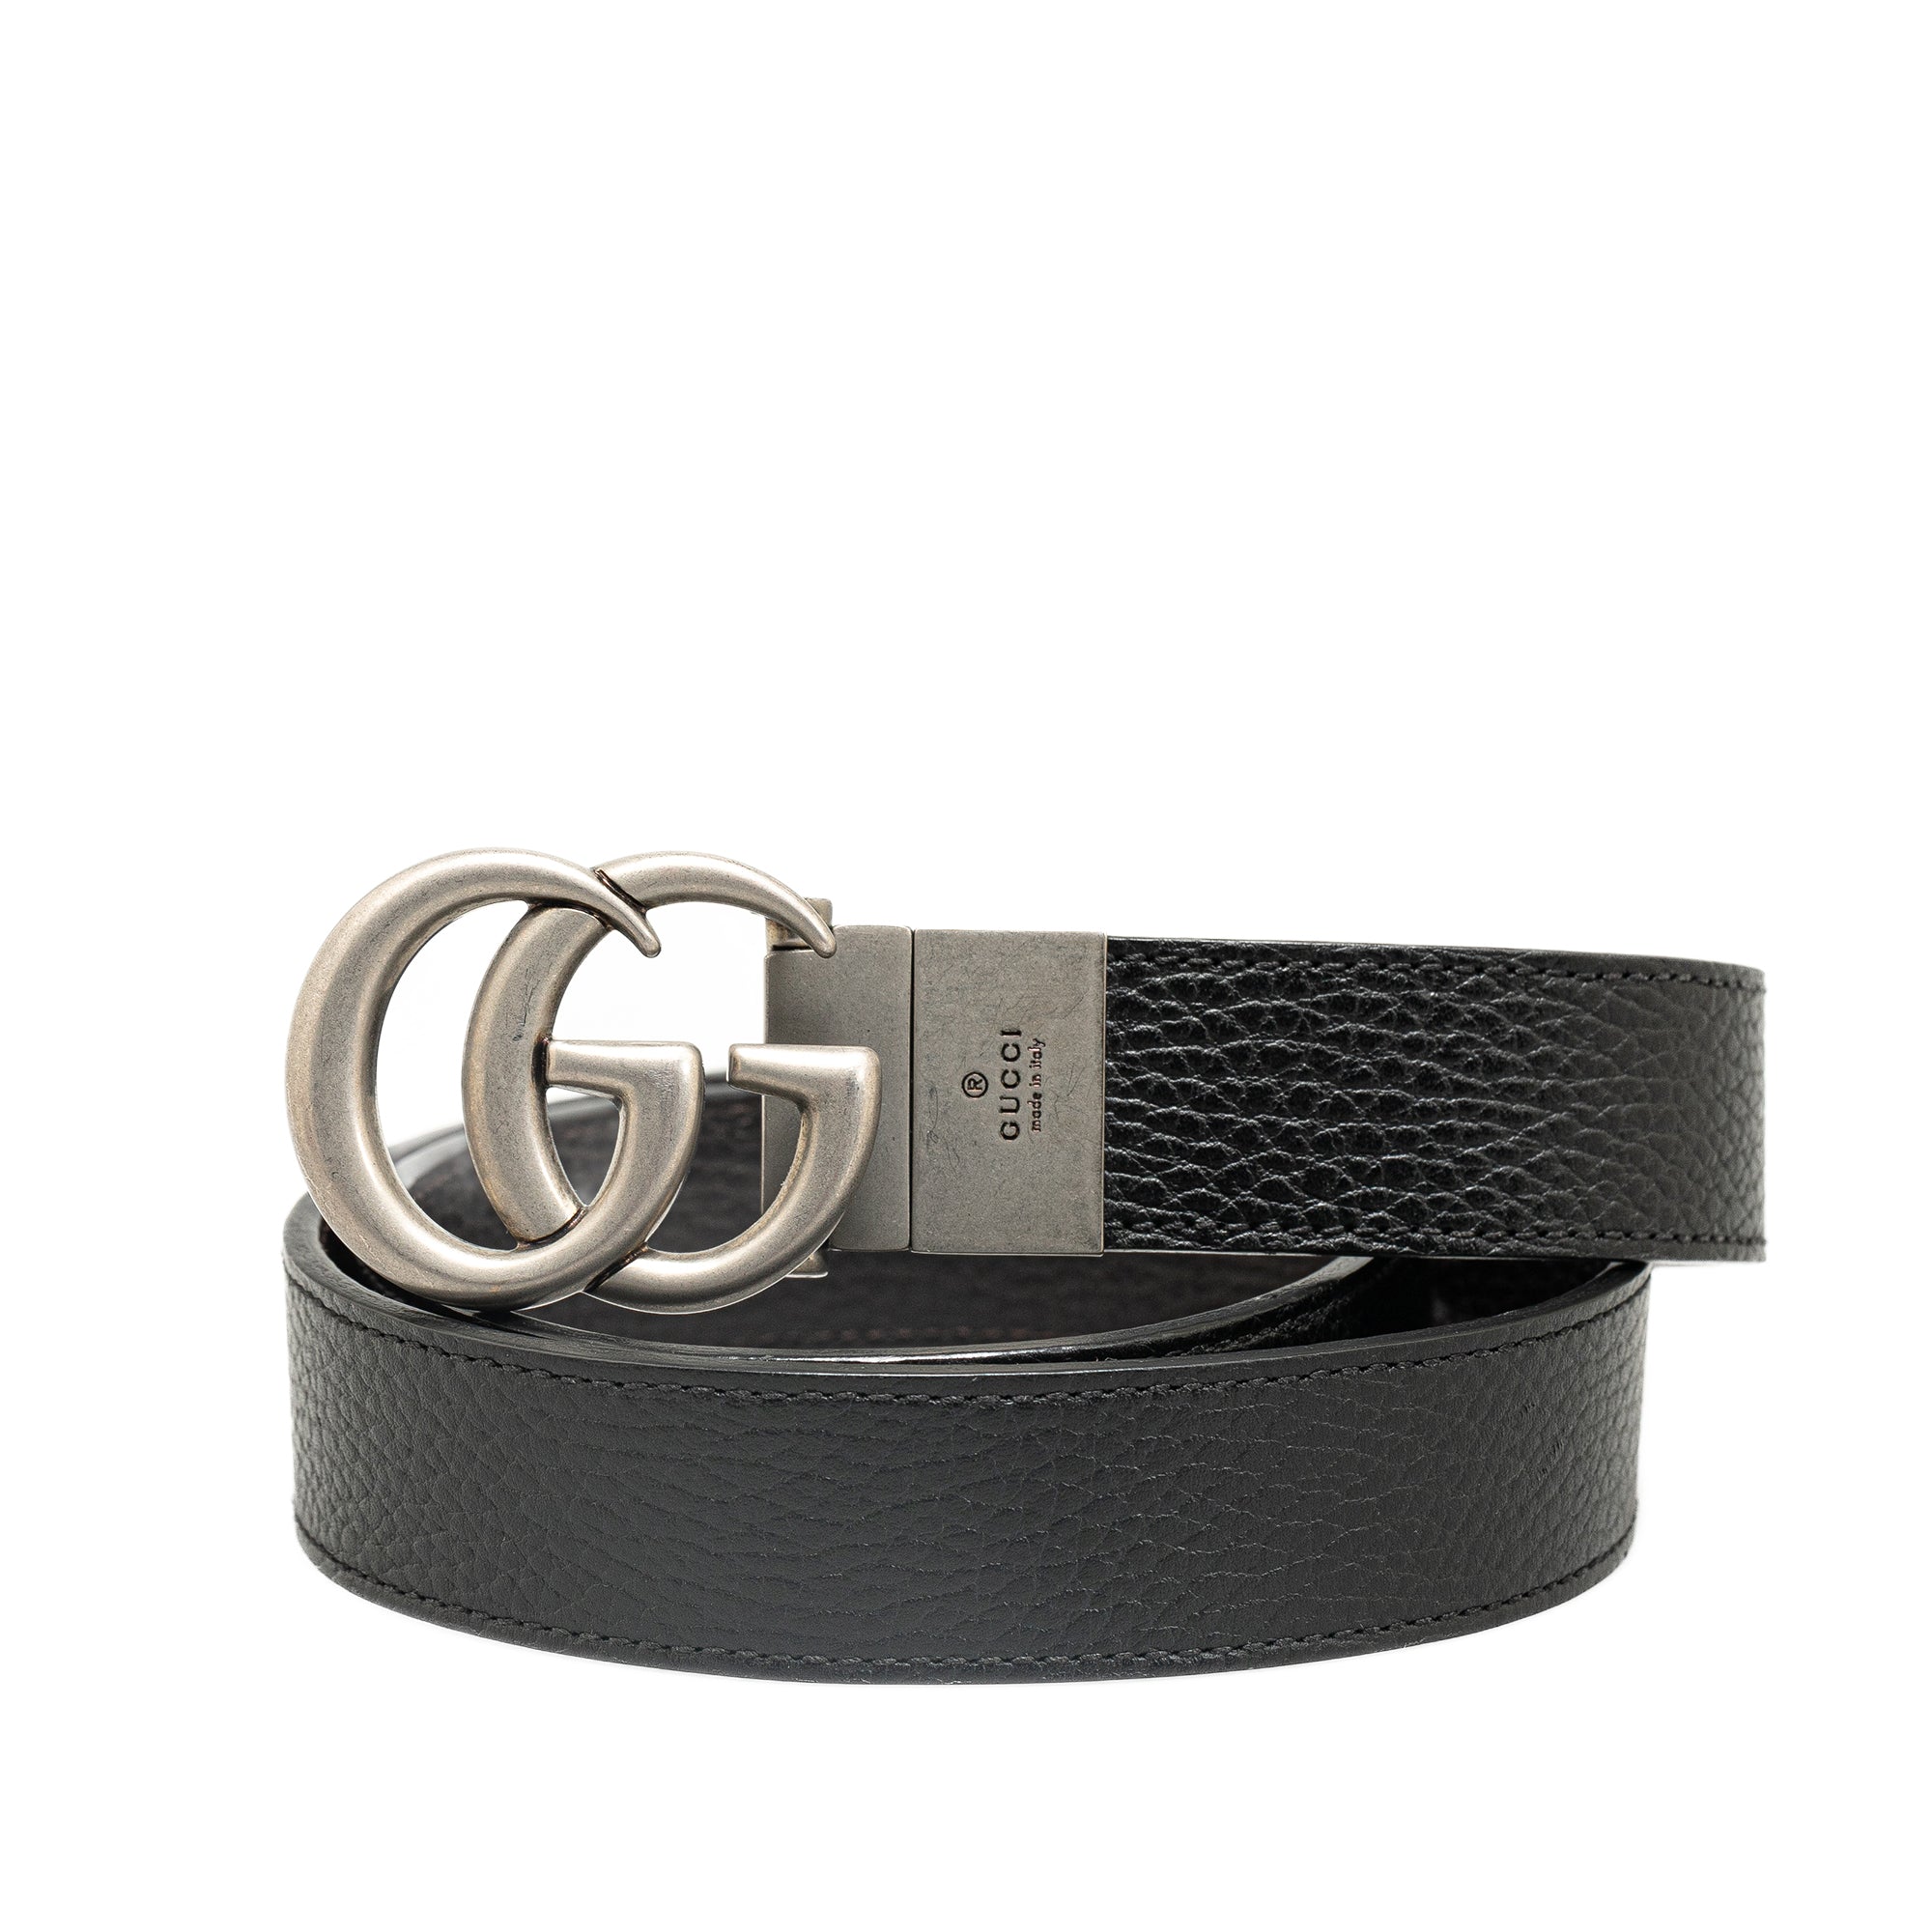 GG Marmont Reversible Leather Belt